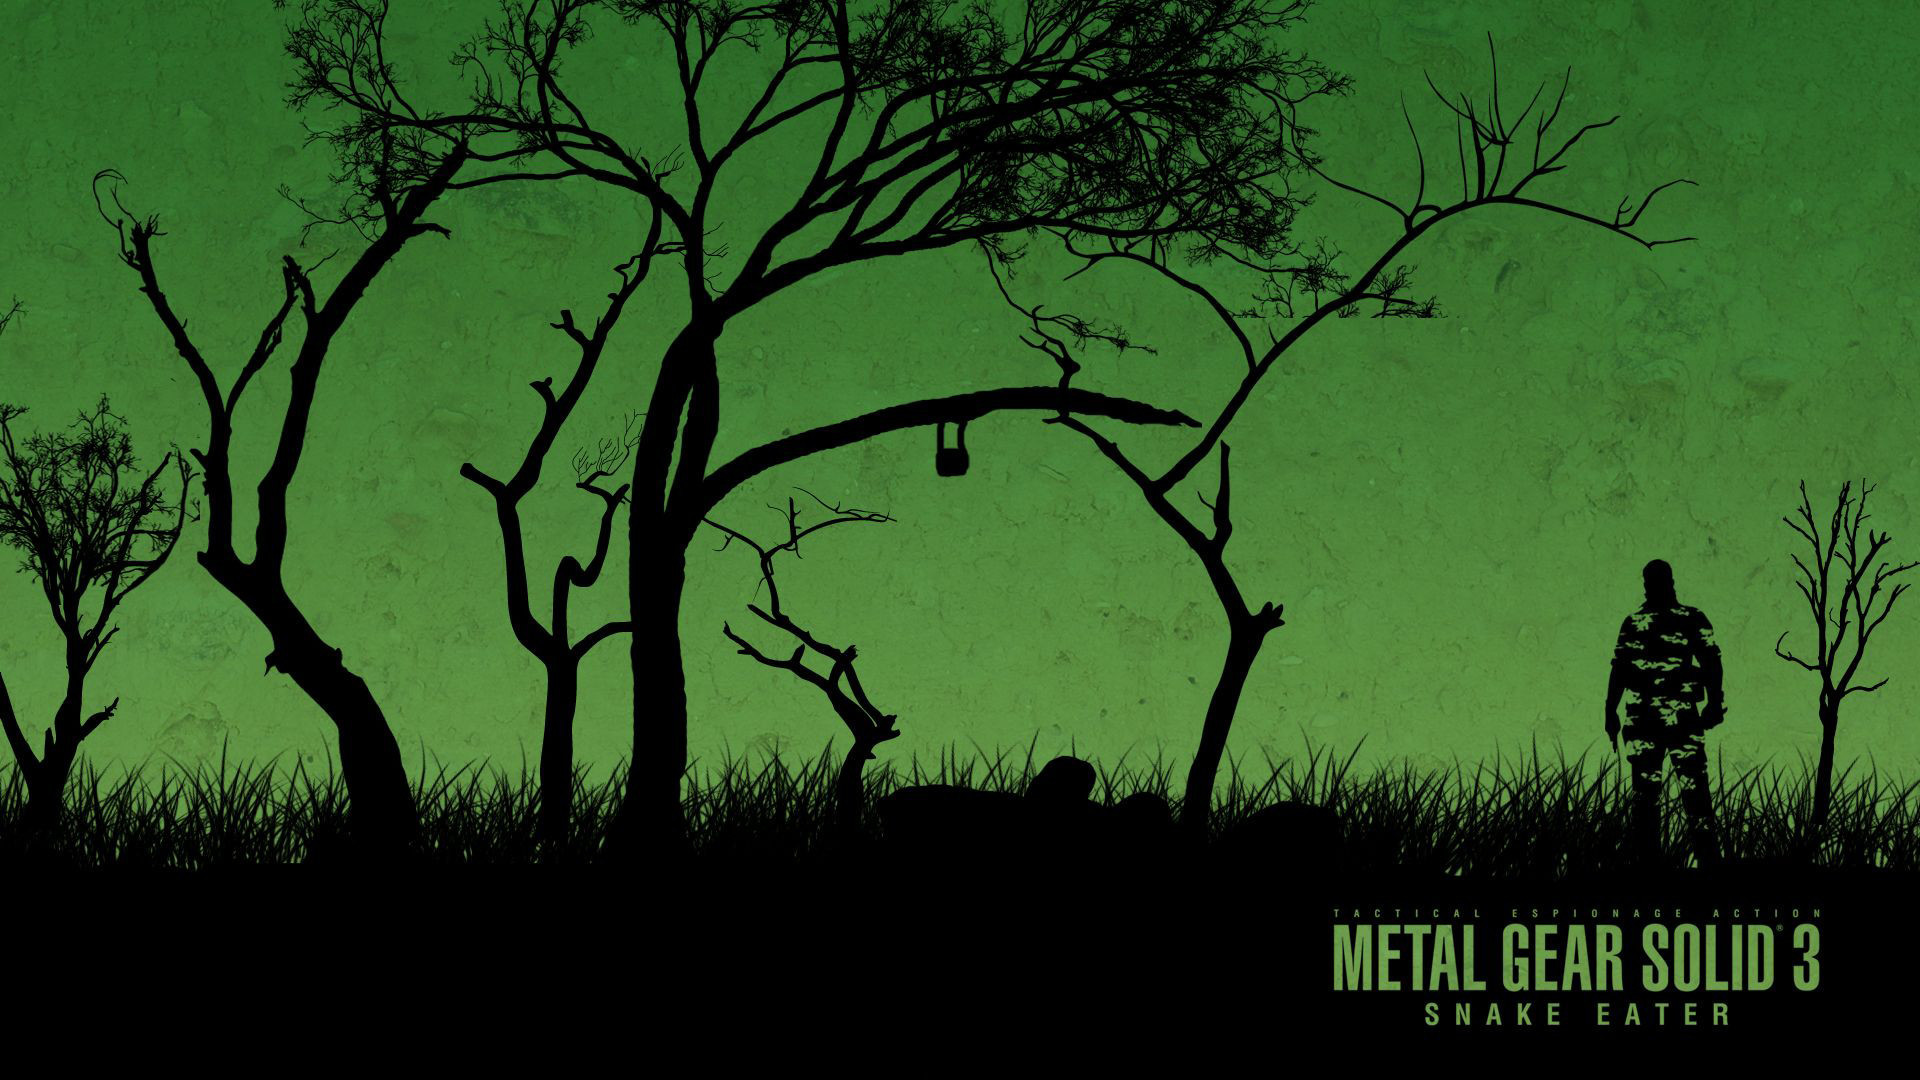 1920x1080 13 Metal Gear Solid 3: Snake Eater HD Wallpapers | Backgrounds .